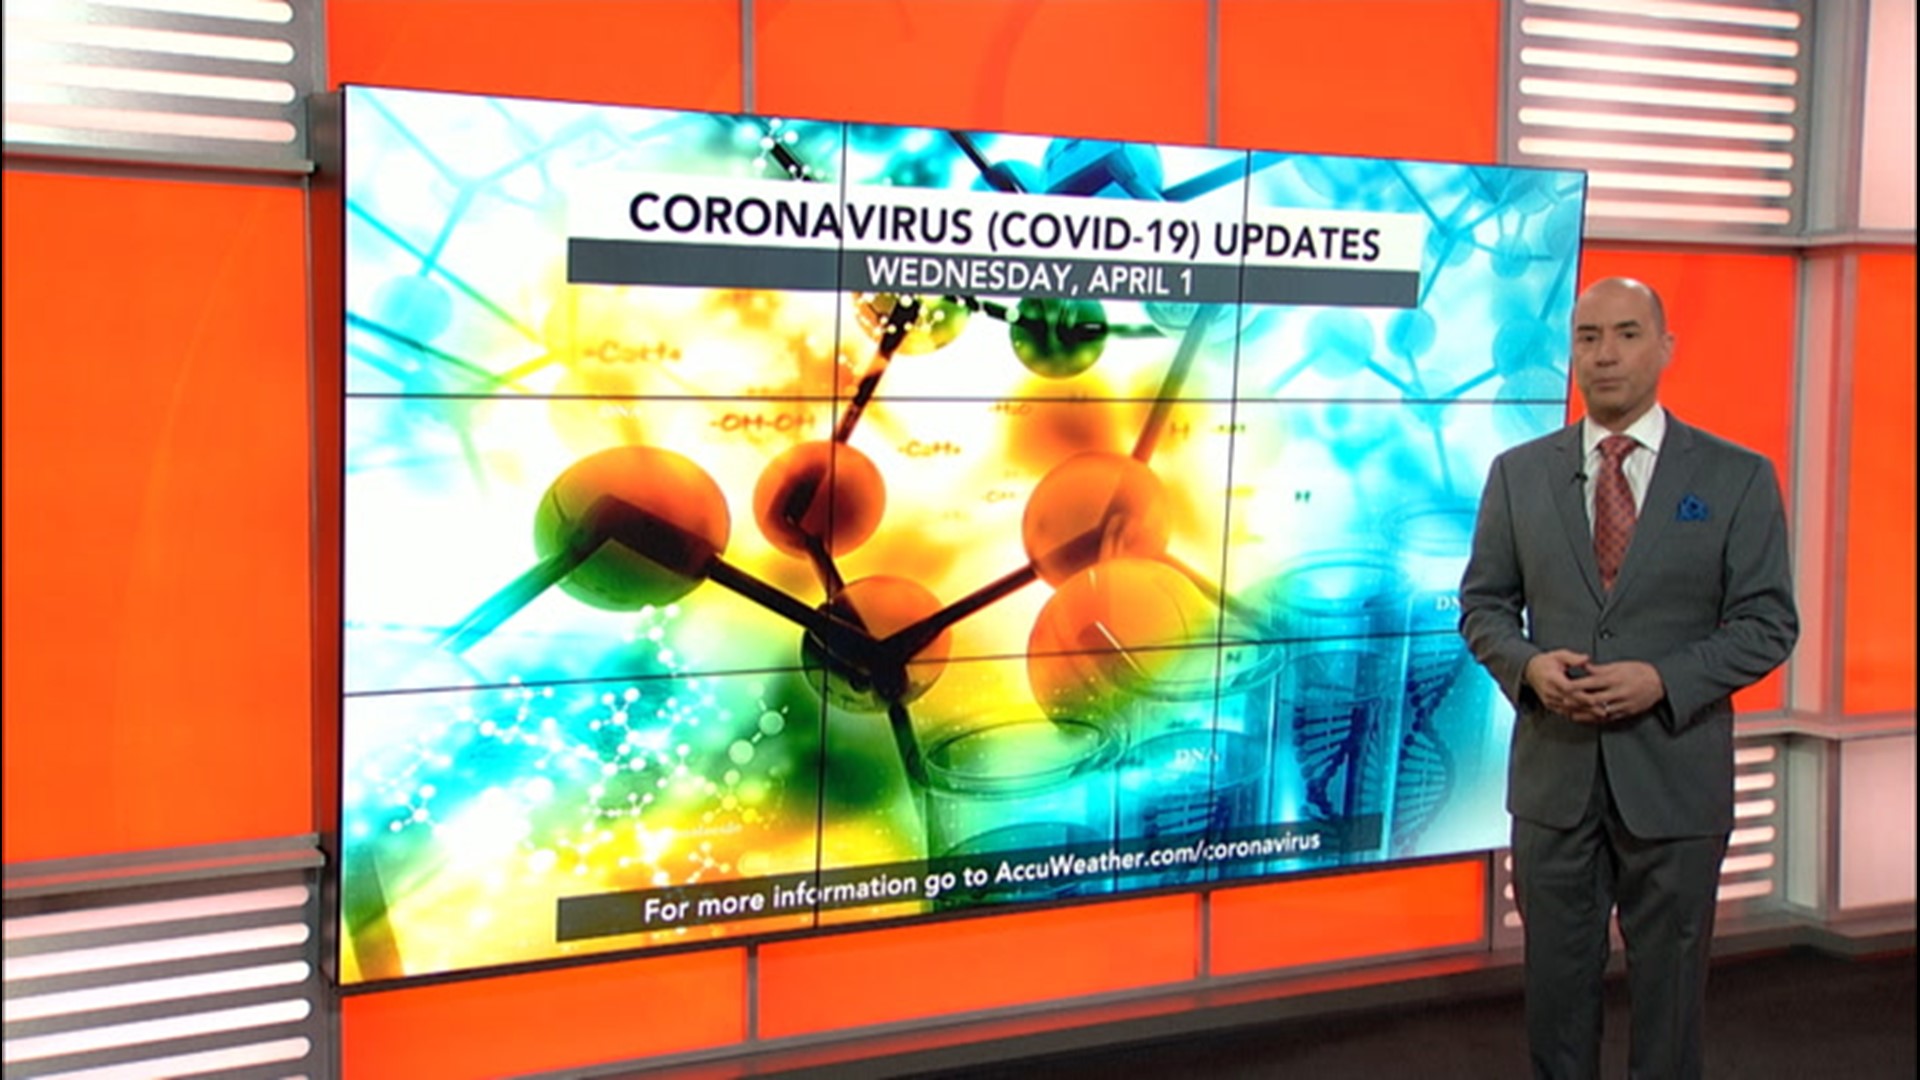 Here's a look at some of the top stories surrounding coronavirus for April 1.